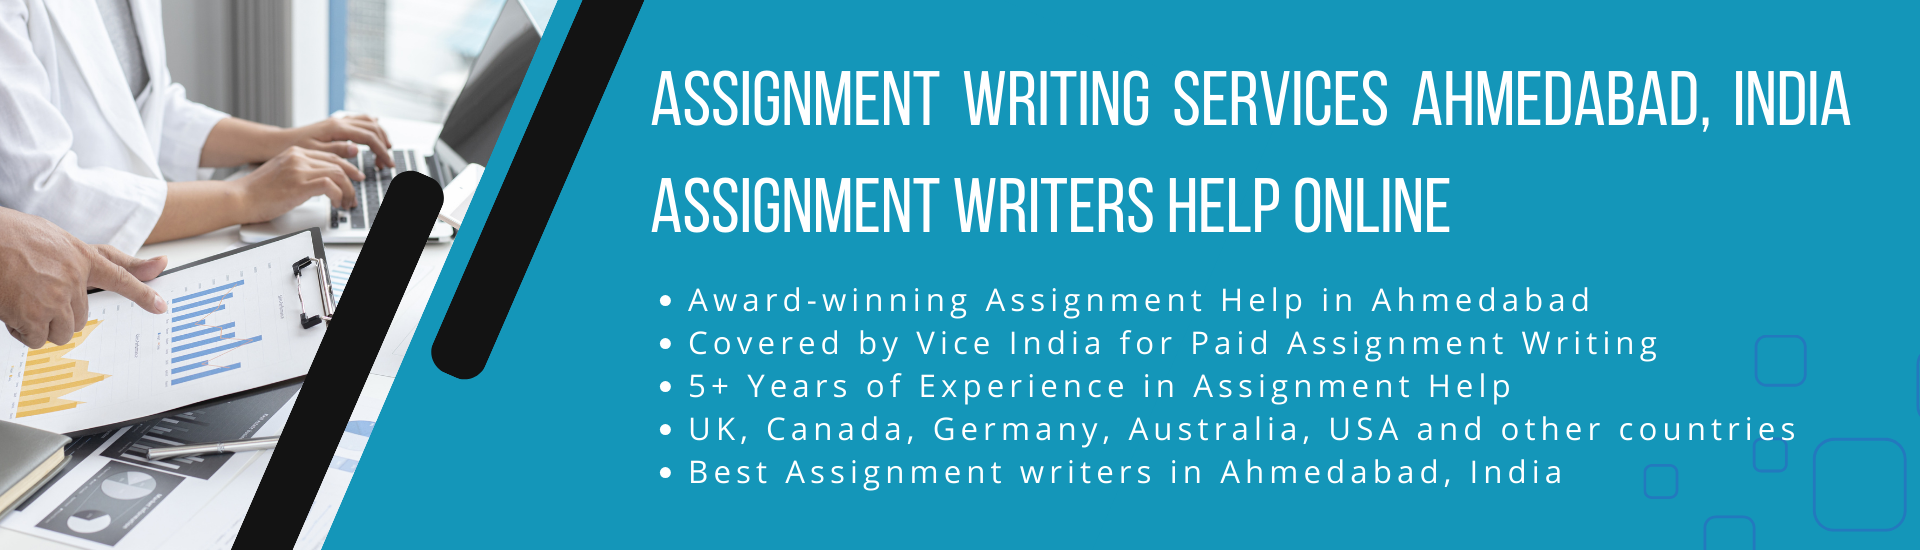 Assignment Writing Services Ahmedabad, India Assignment Writers Help Online